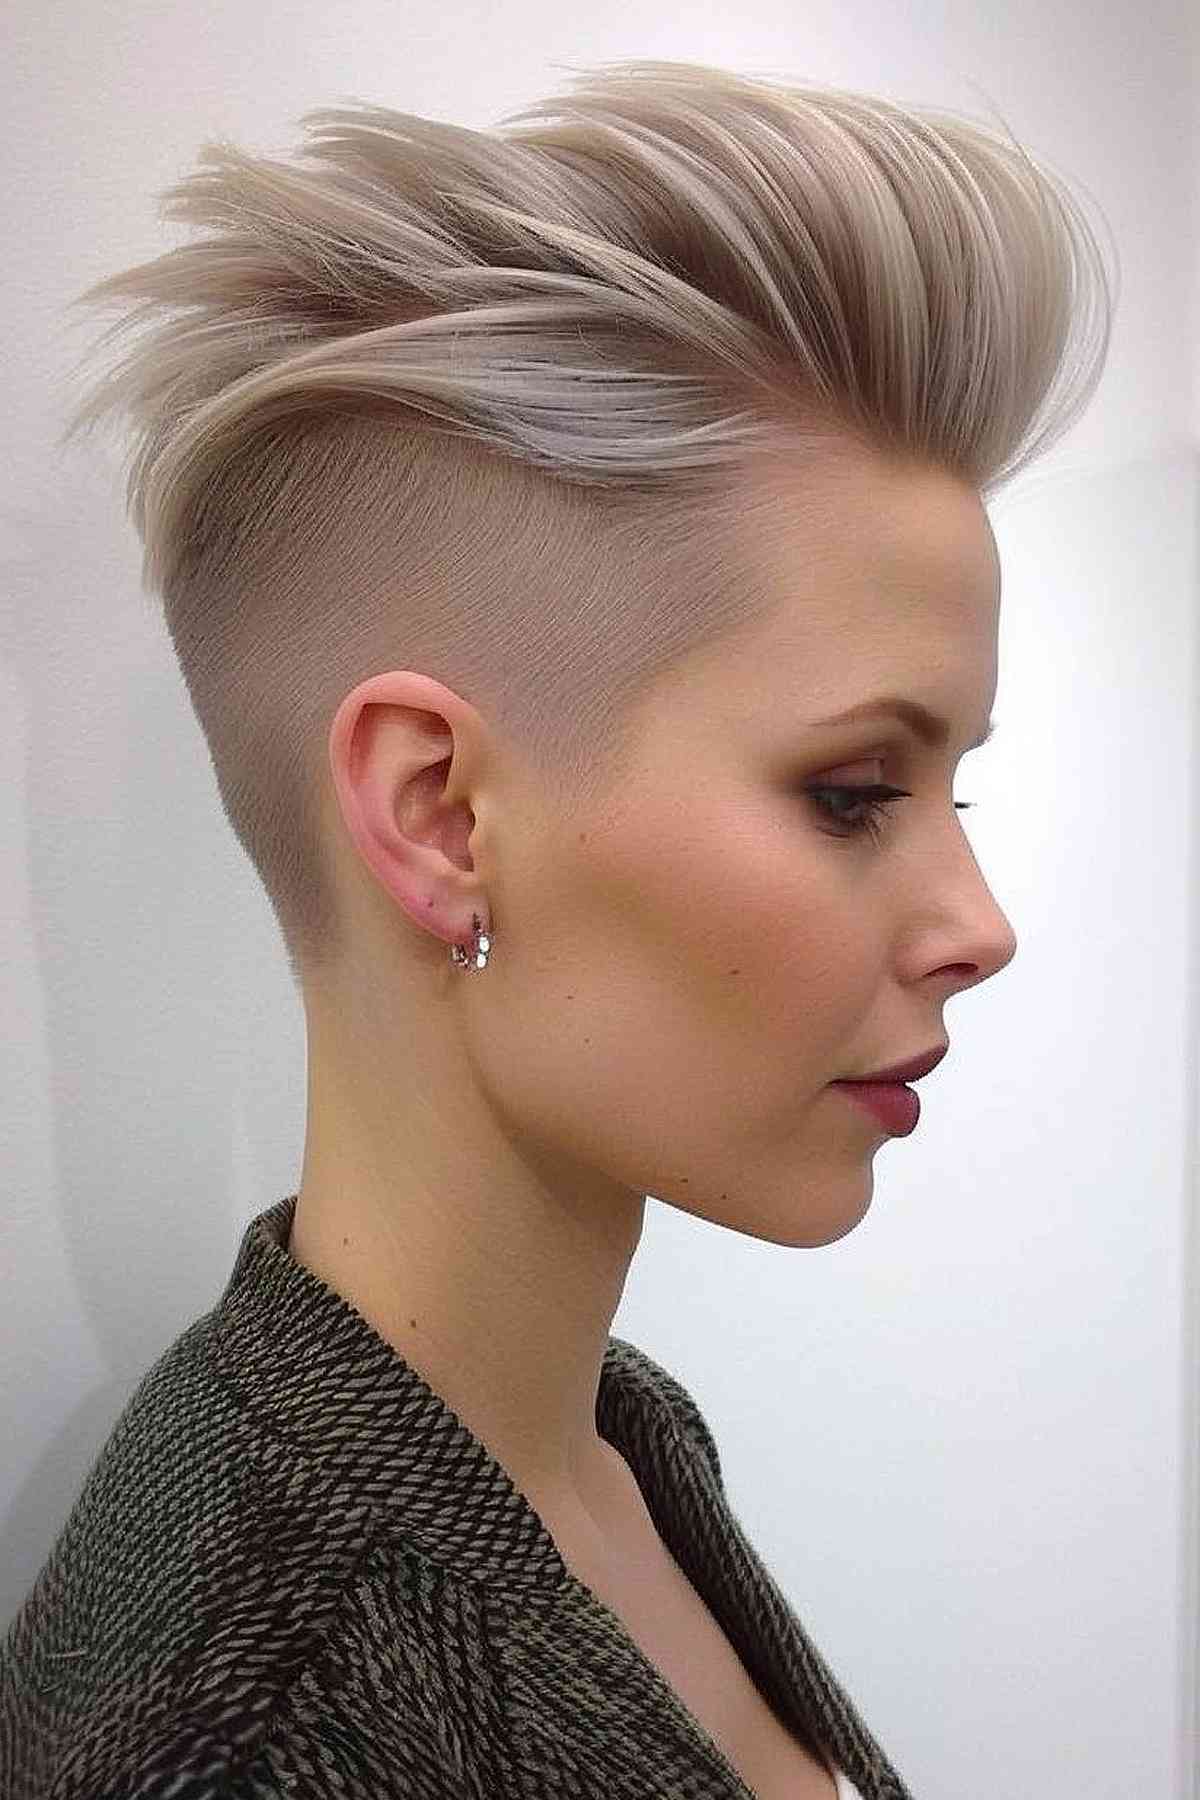 Sleek undercut punk pixie with a smooth, side-swept top in cool blonde, ideal for a bold yet polished look.